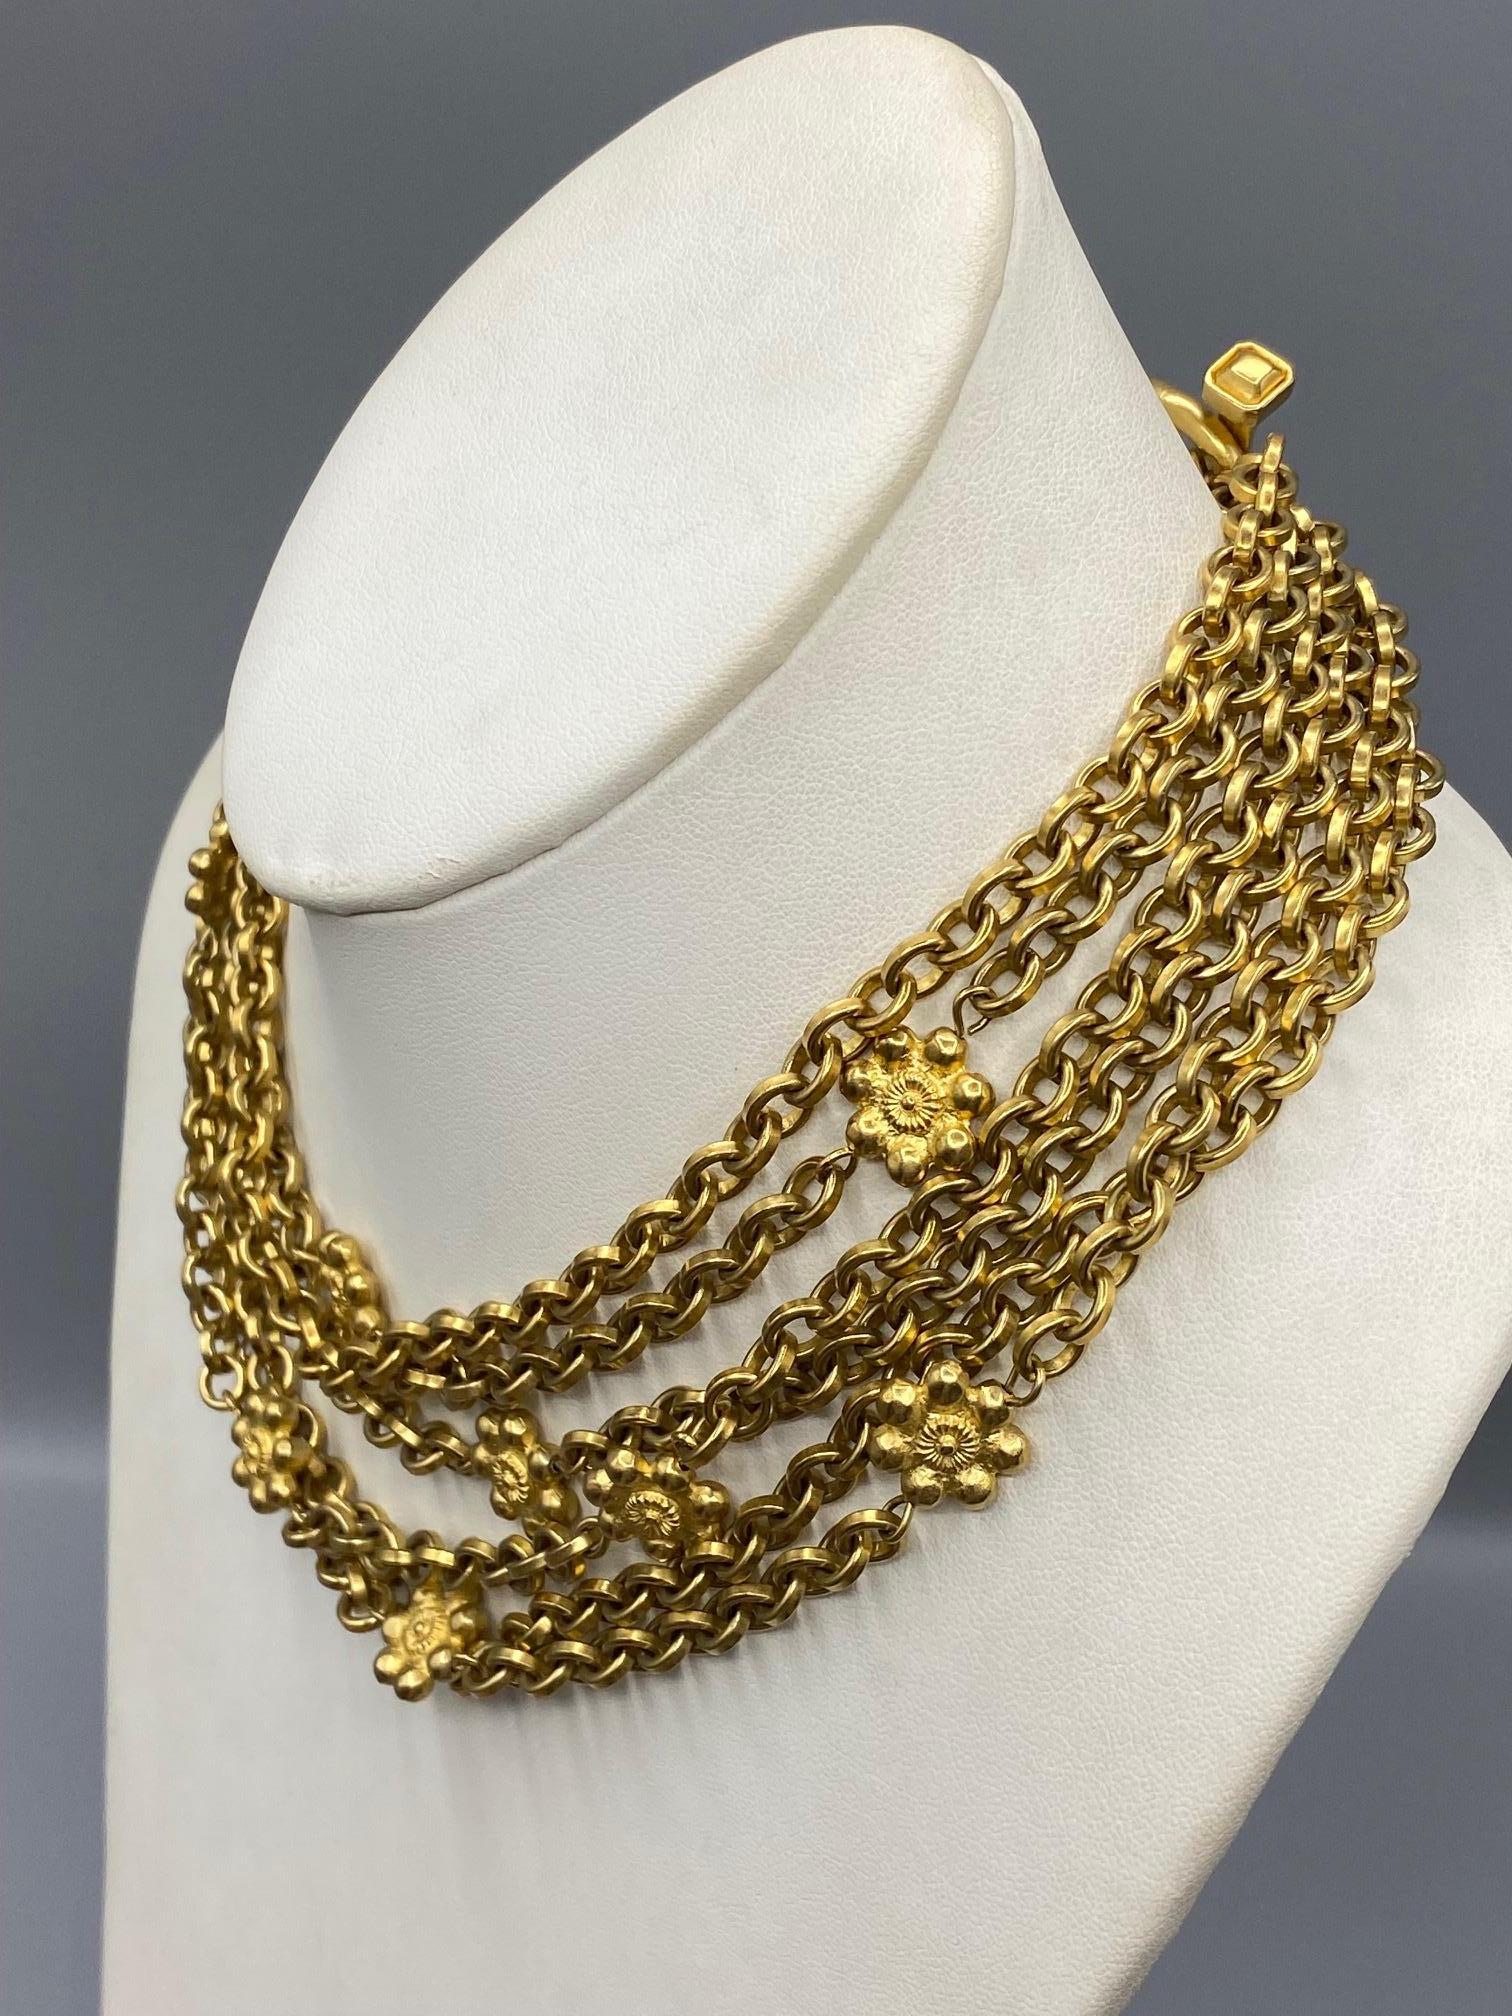 Karl Lagerfeld 1980s Six Strand Gold Toggle Necklace In Excellent Condition For Sale In New York, NY